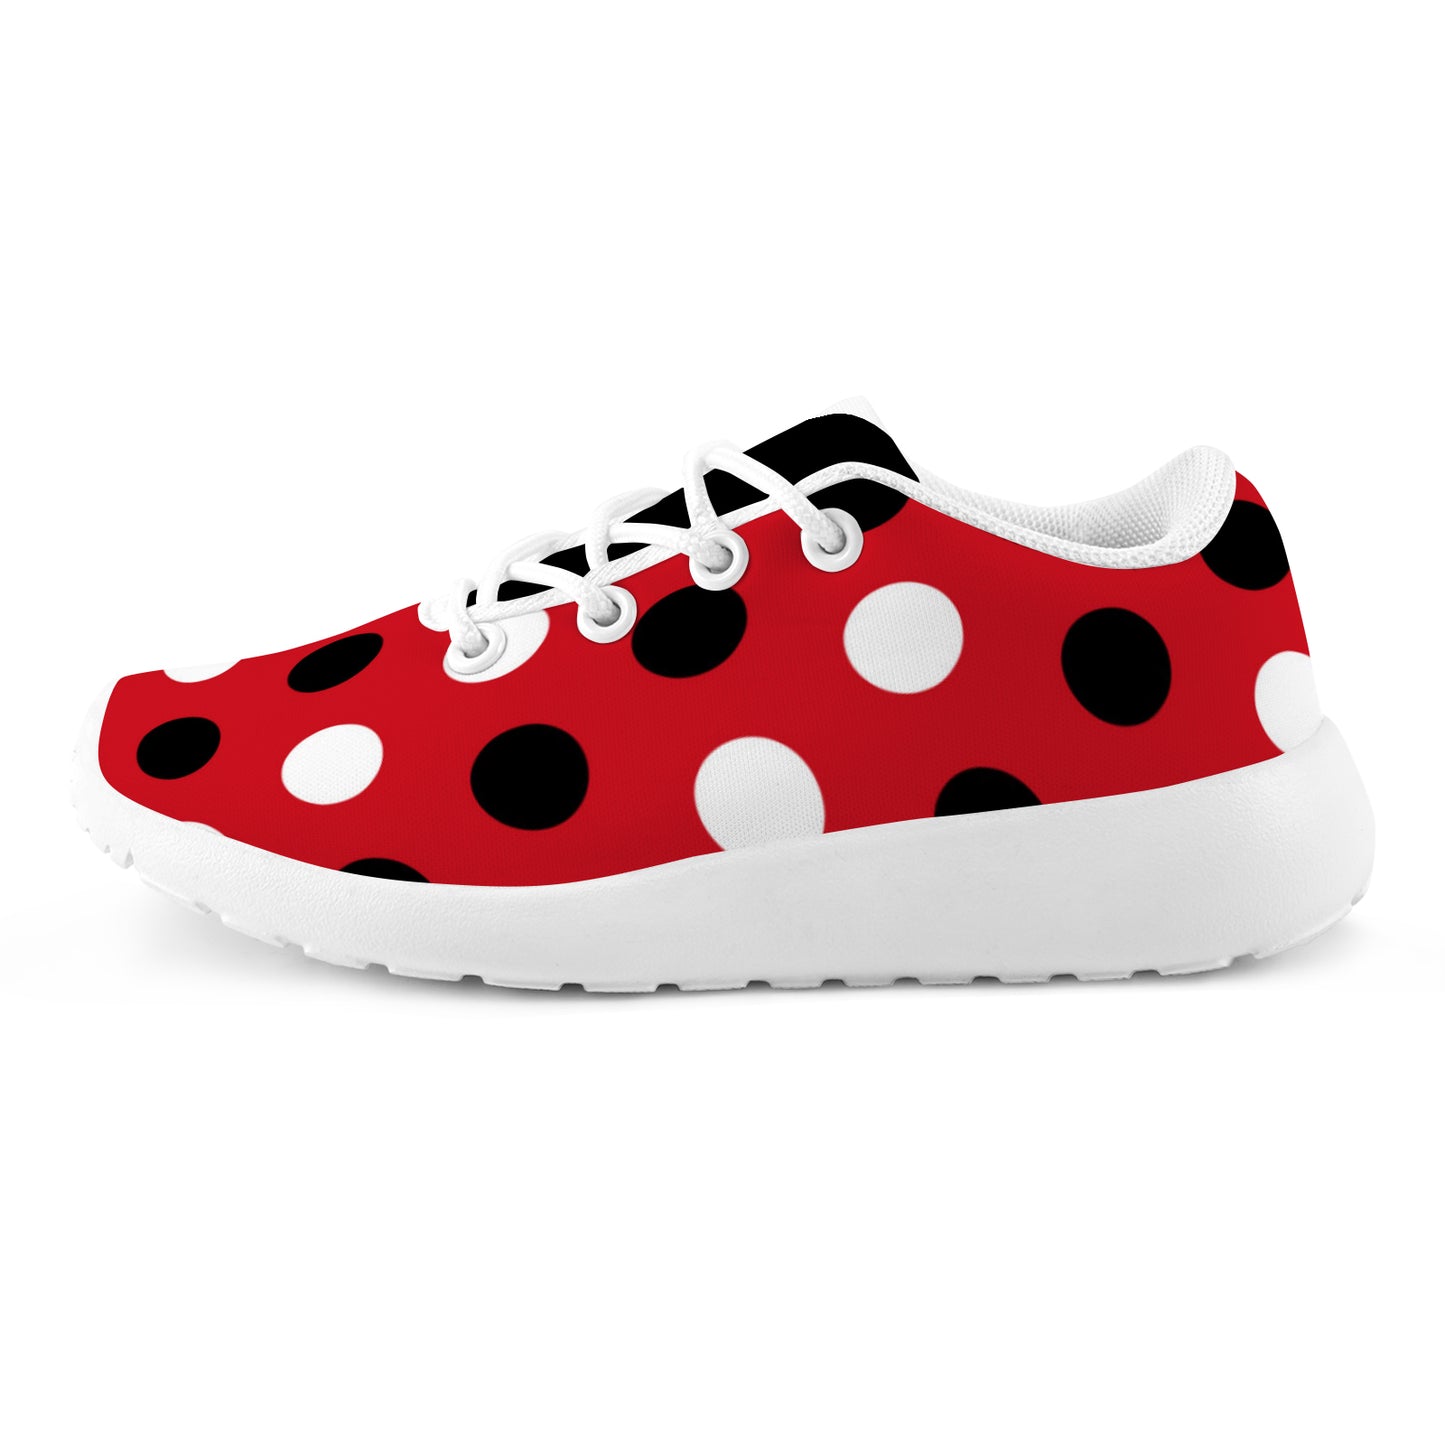 Kid's Sneakers - Red/White/Black Polkadots